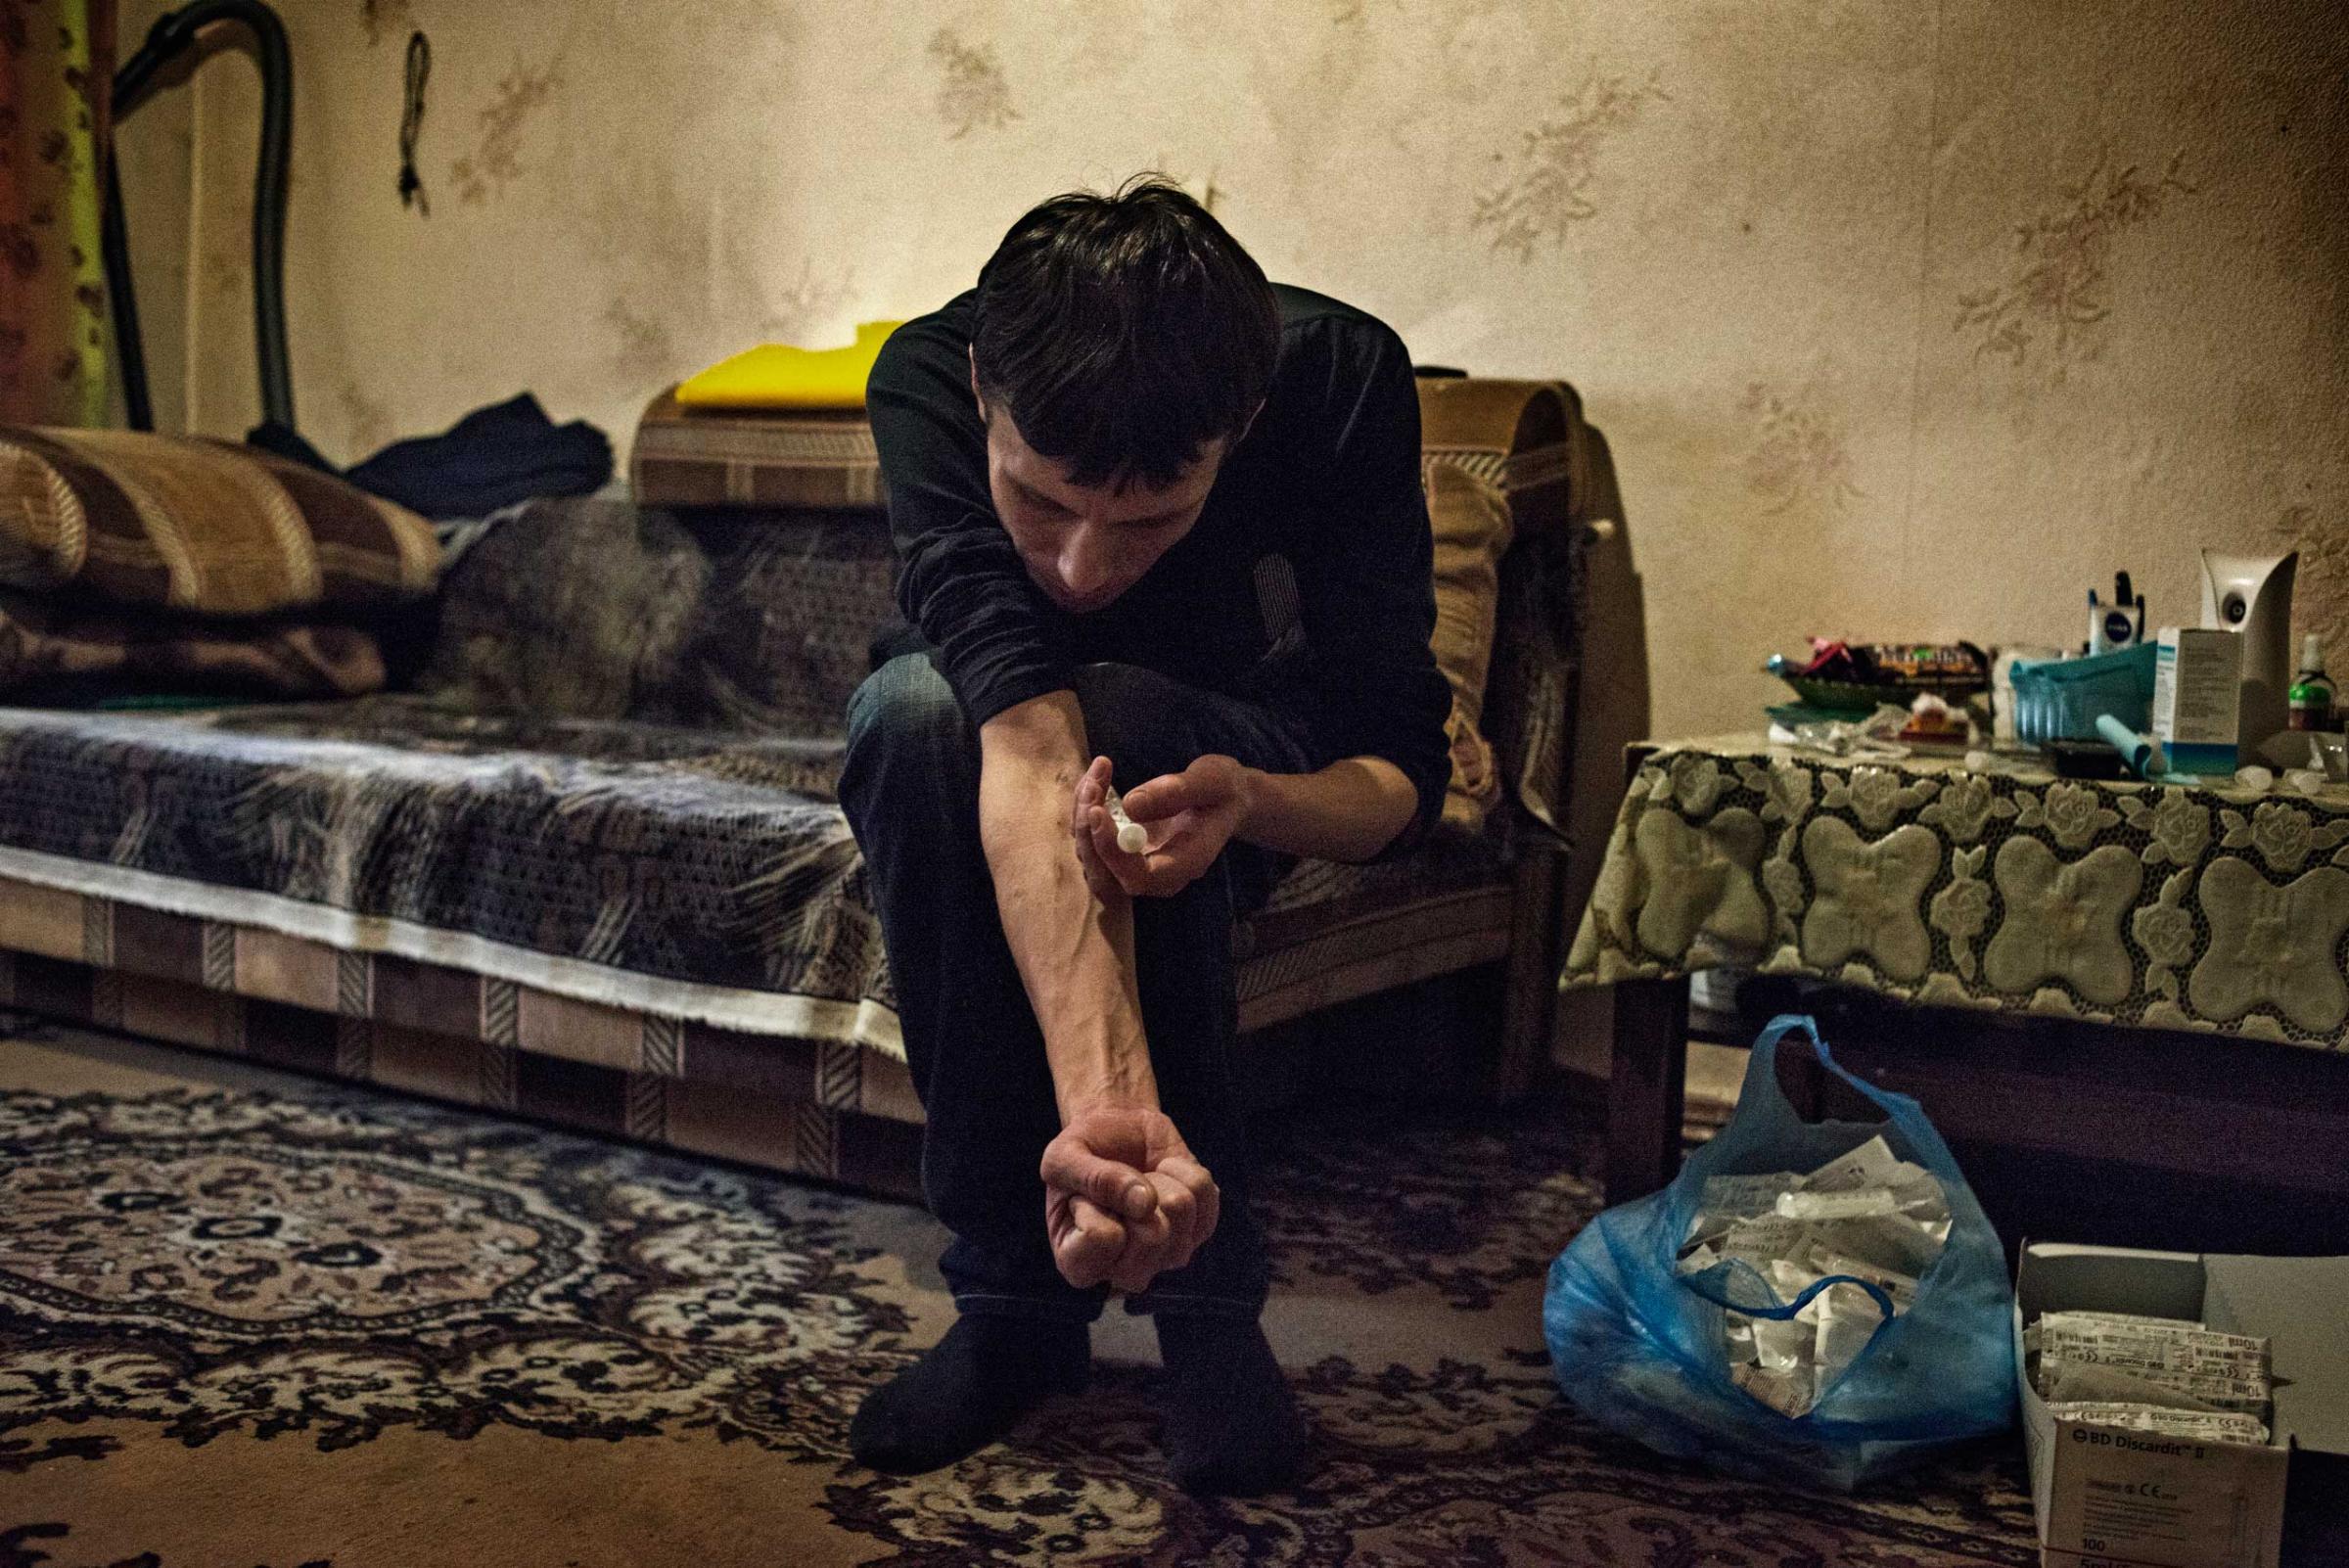 Alexey injects krokodil. The effect of the drug lasts about 40 minutes.